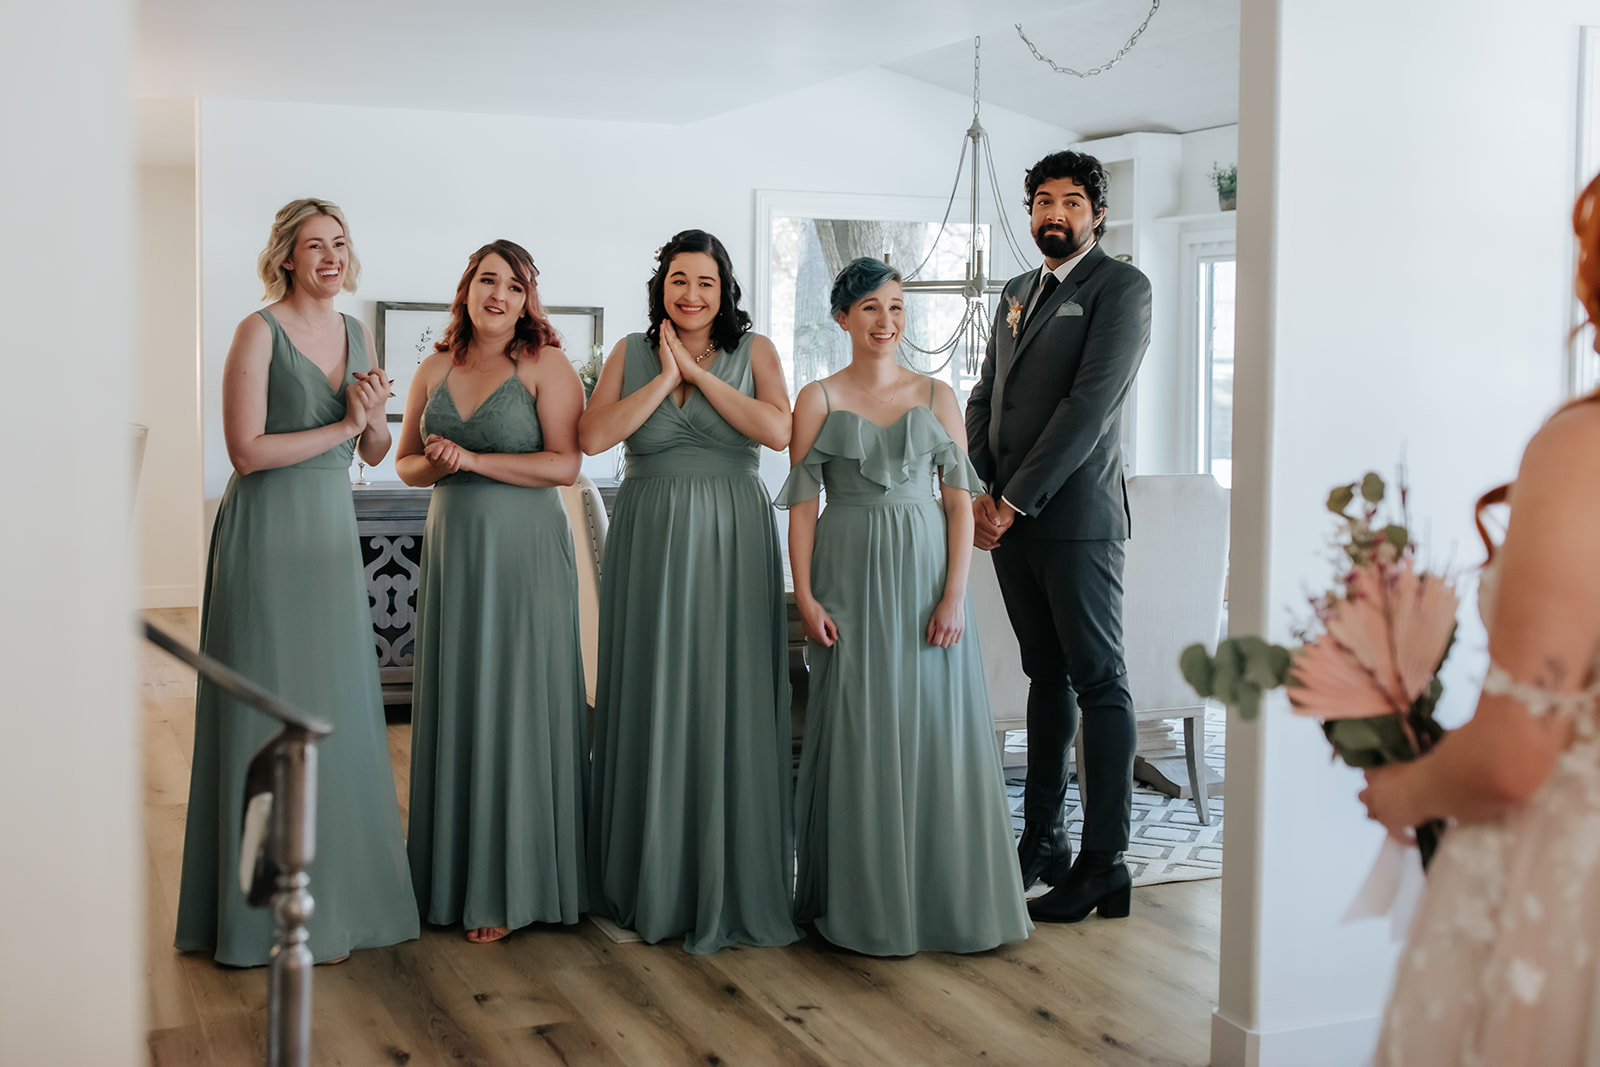 bridal party crying a clapping after seeing the bride for the first time dressed in her wedding attire